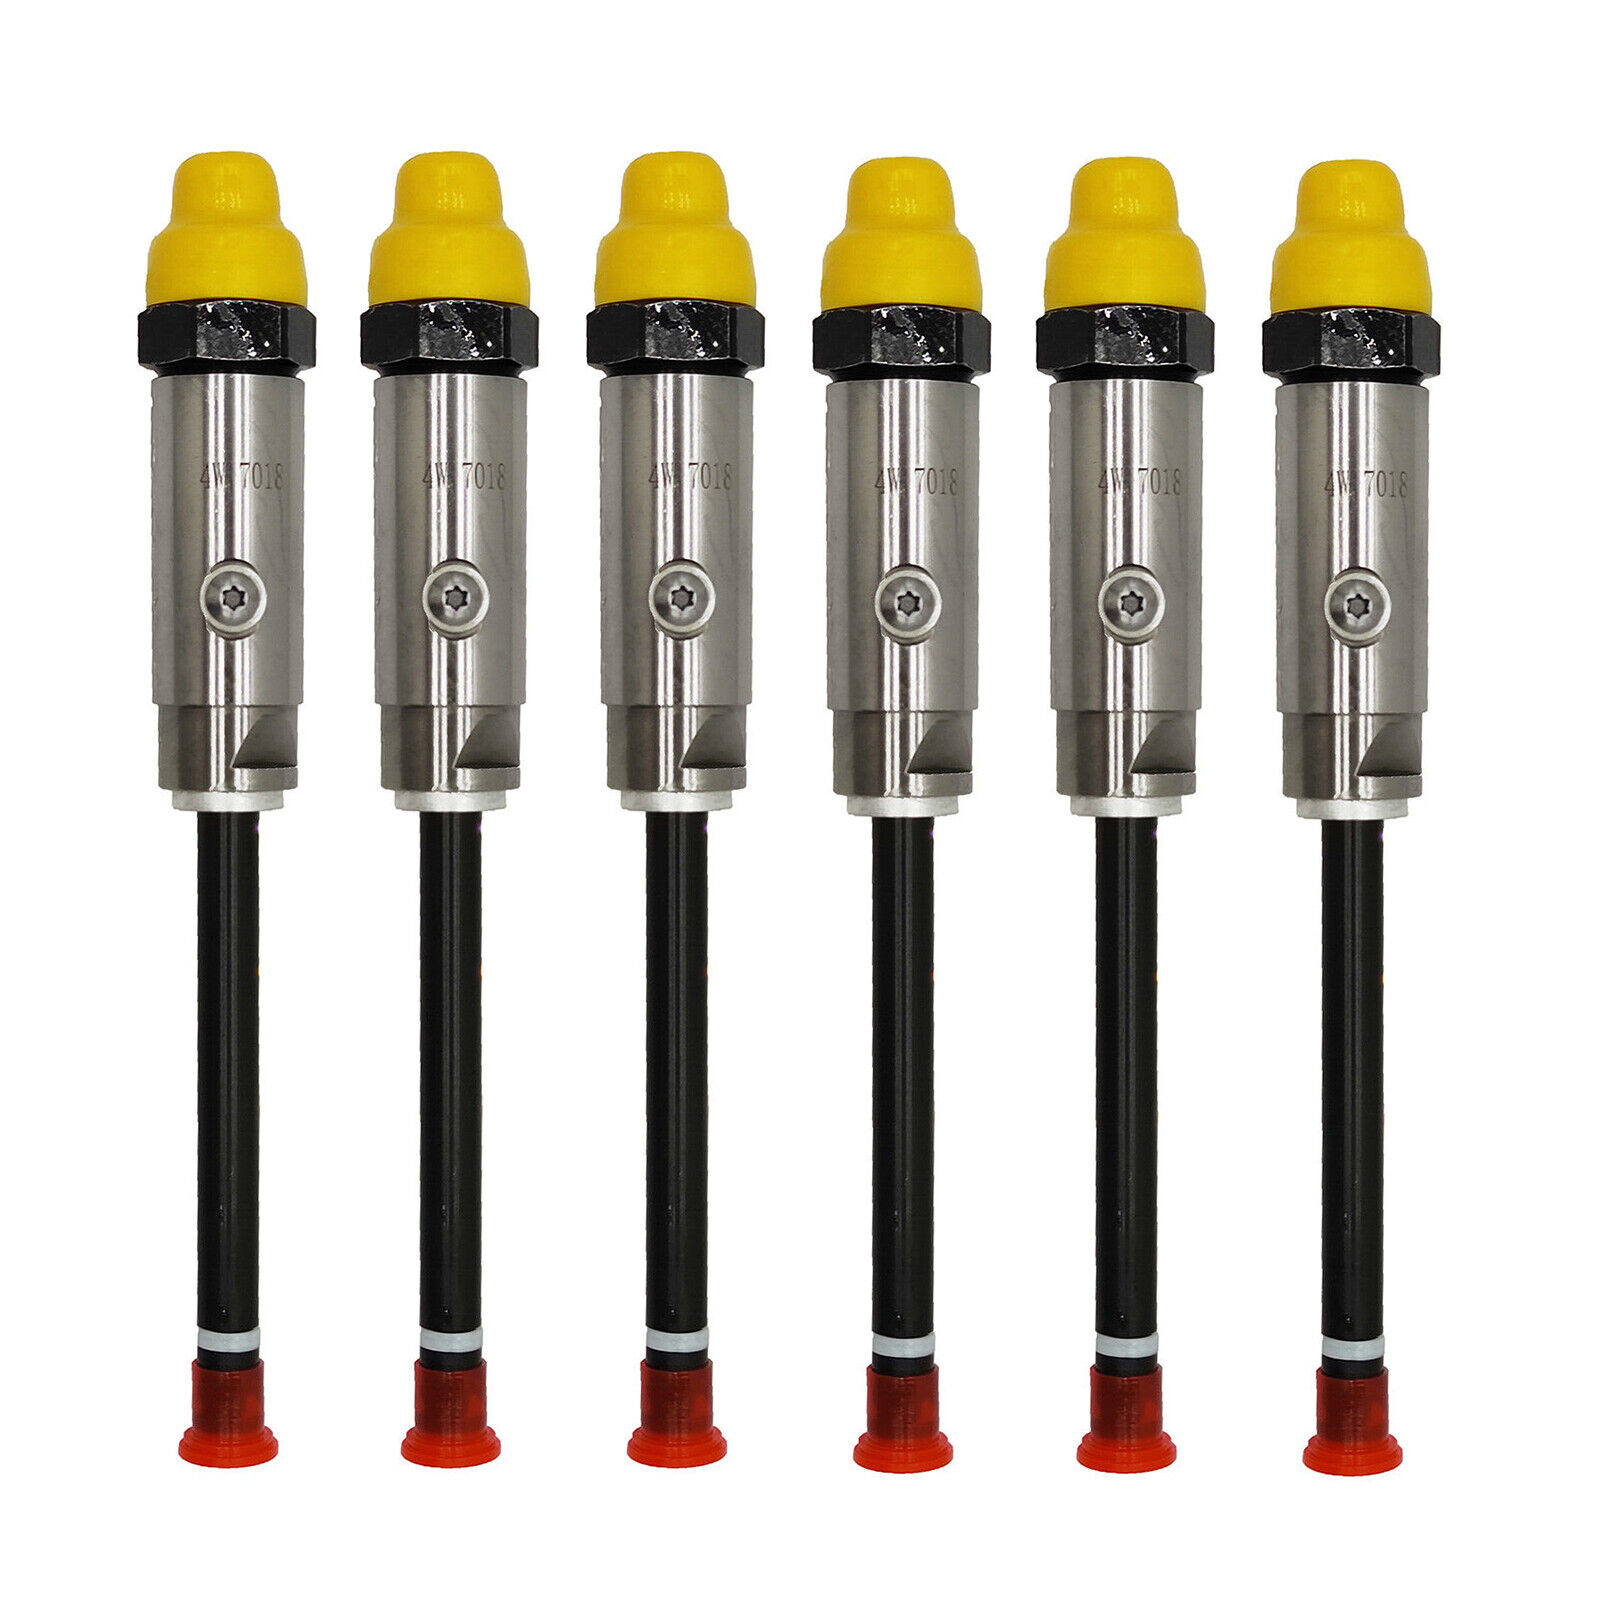 6pcs Fuel Injector Nozzle 4W7018 OR3422 For Caterpillar 3406 3408 Engine 988 990